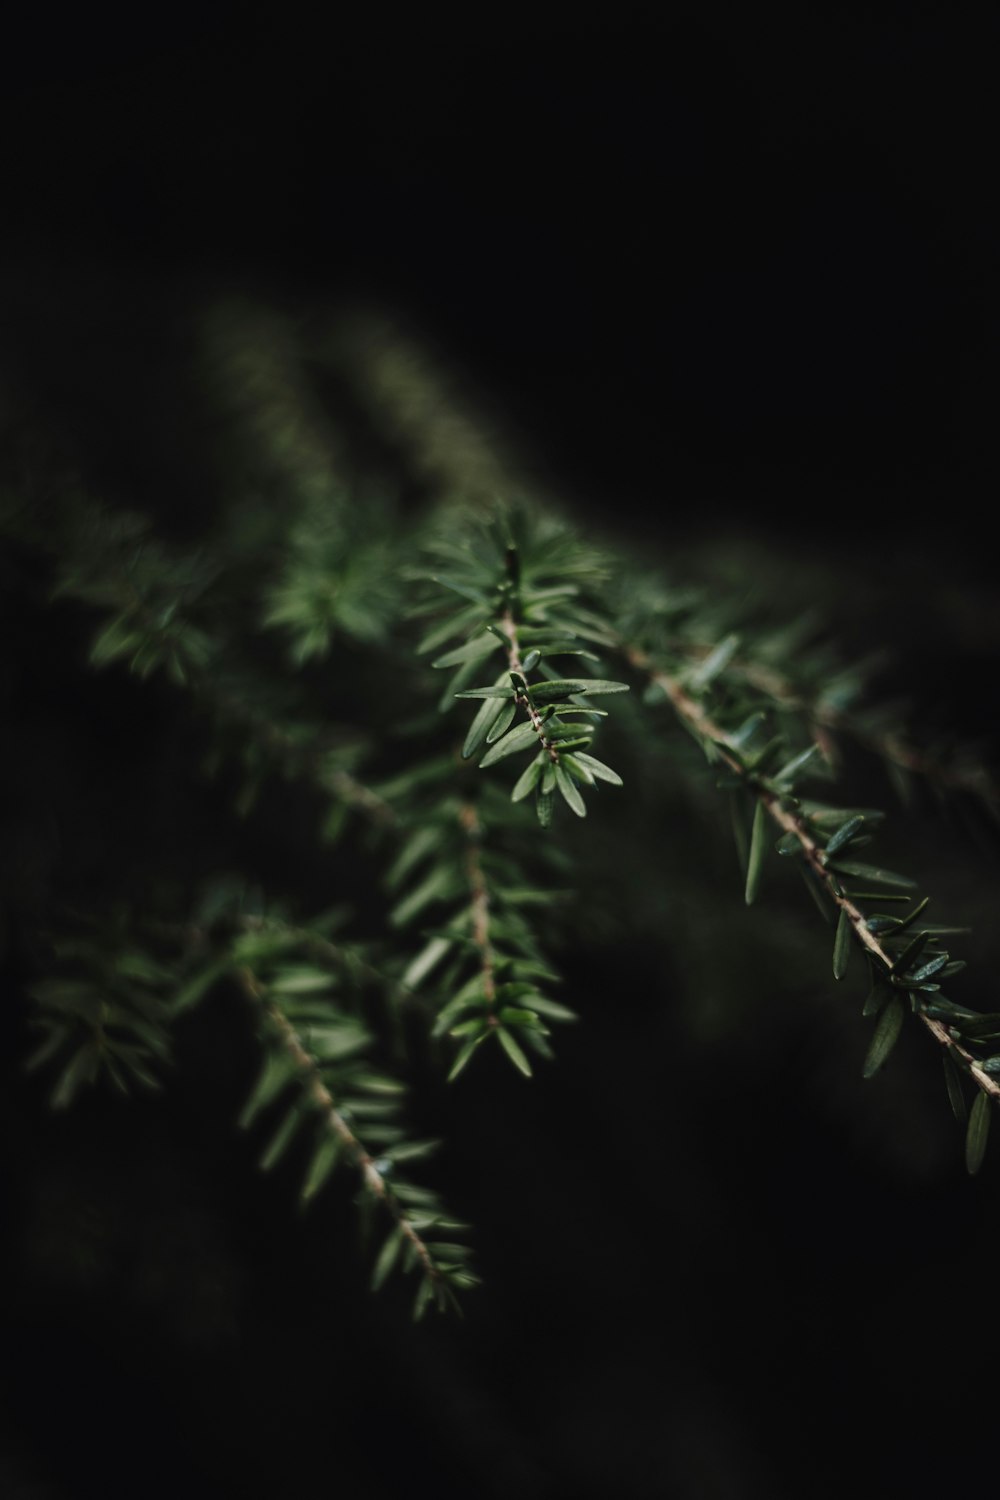 a close up of a tree branch in the dark